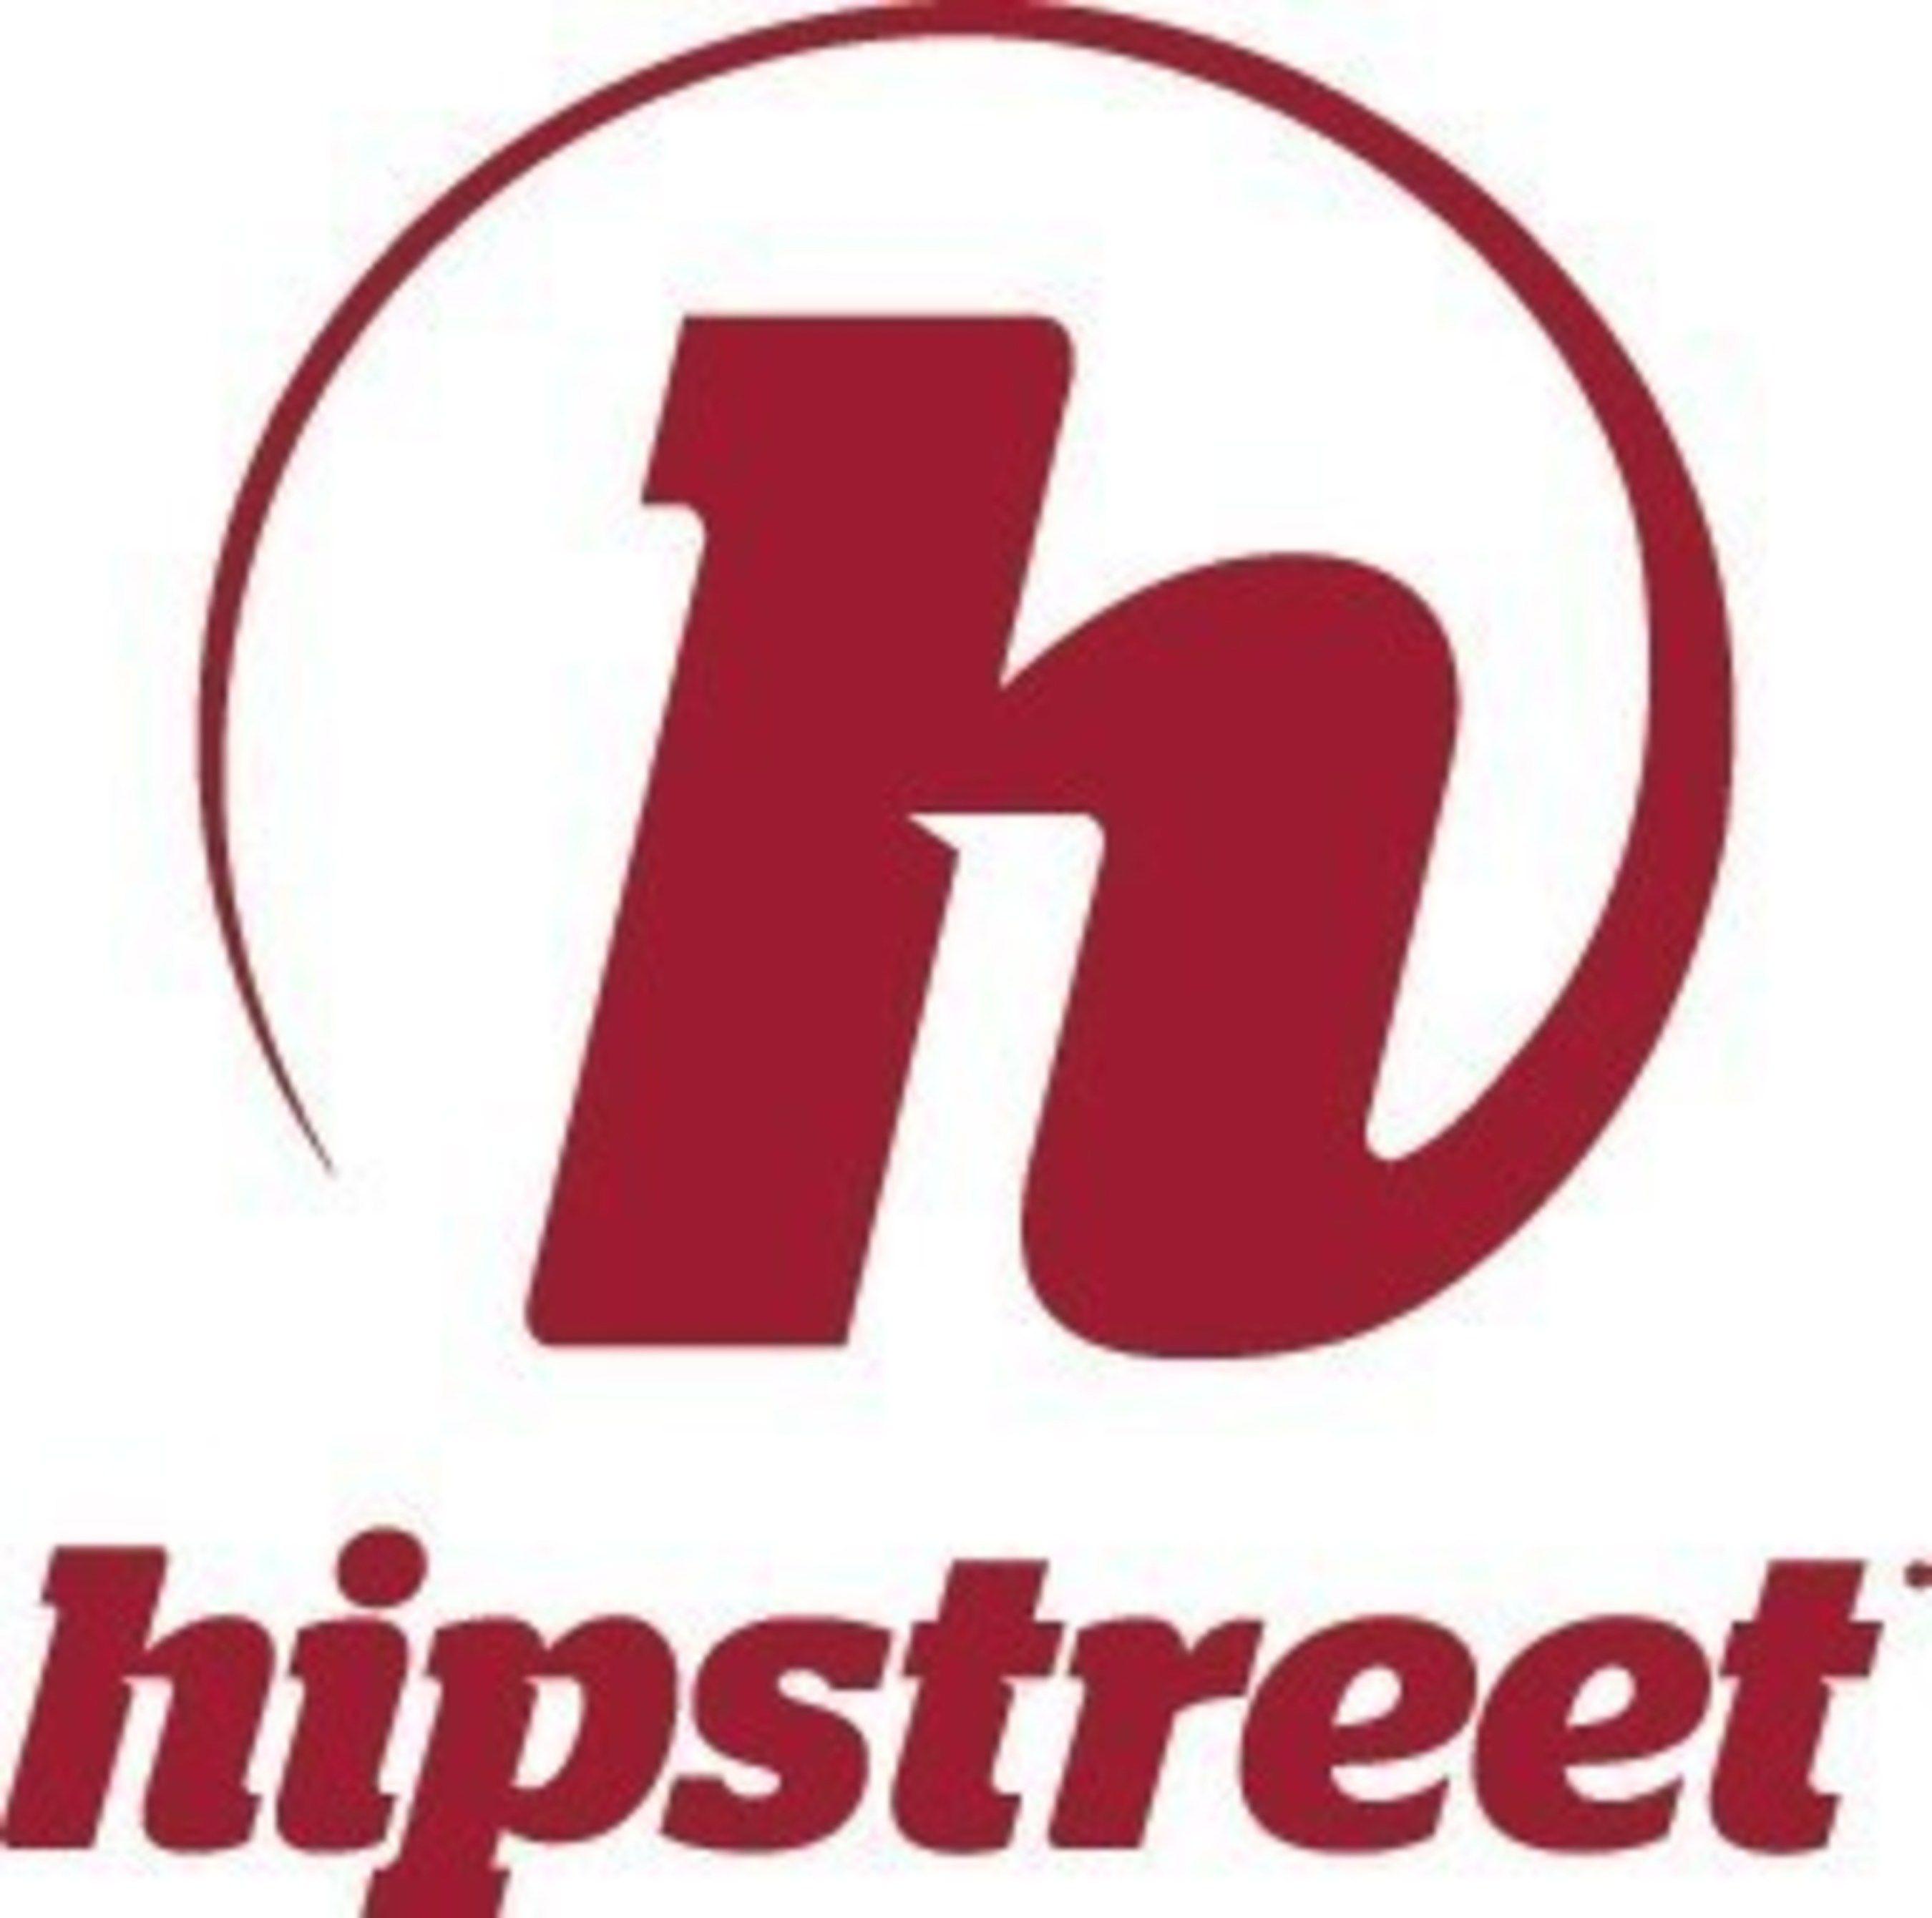 YouTube Stars Logo - Hipstreet Enters Into Exclusive Partnership With World's Top YouTube